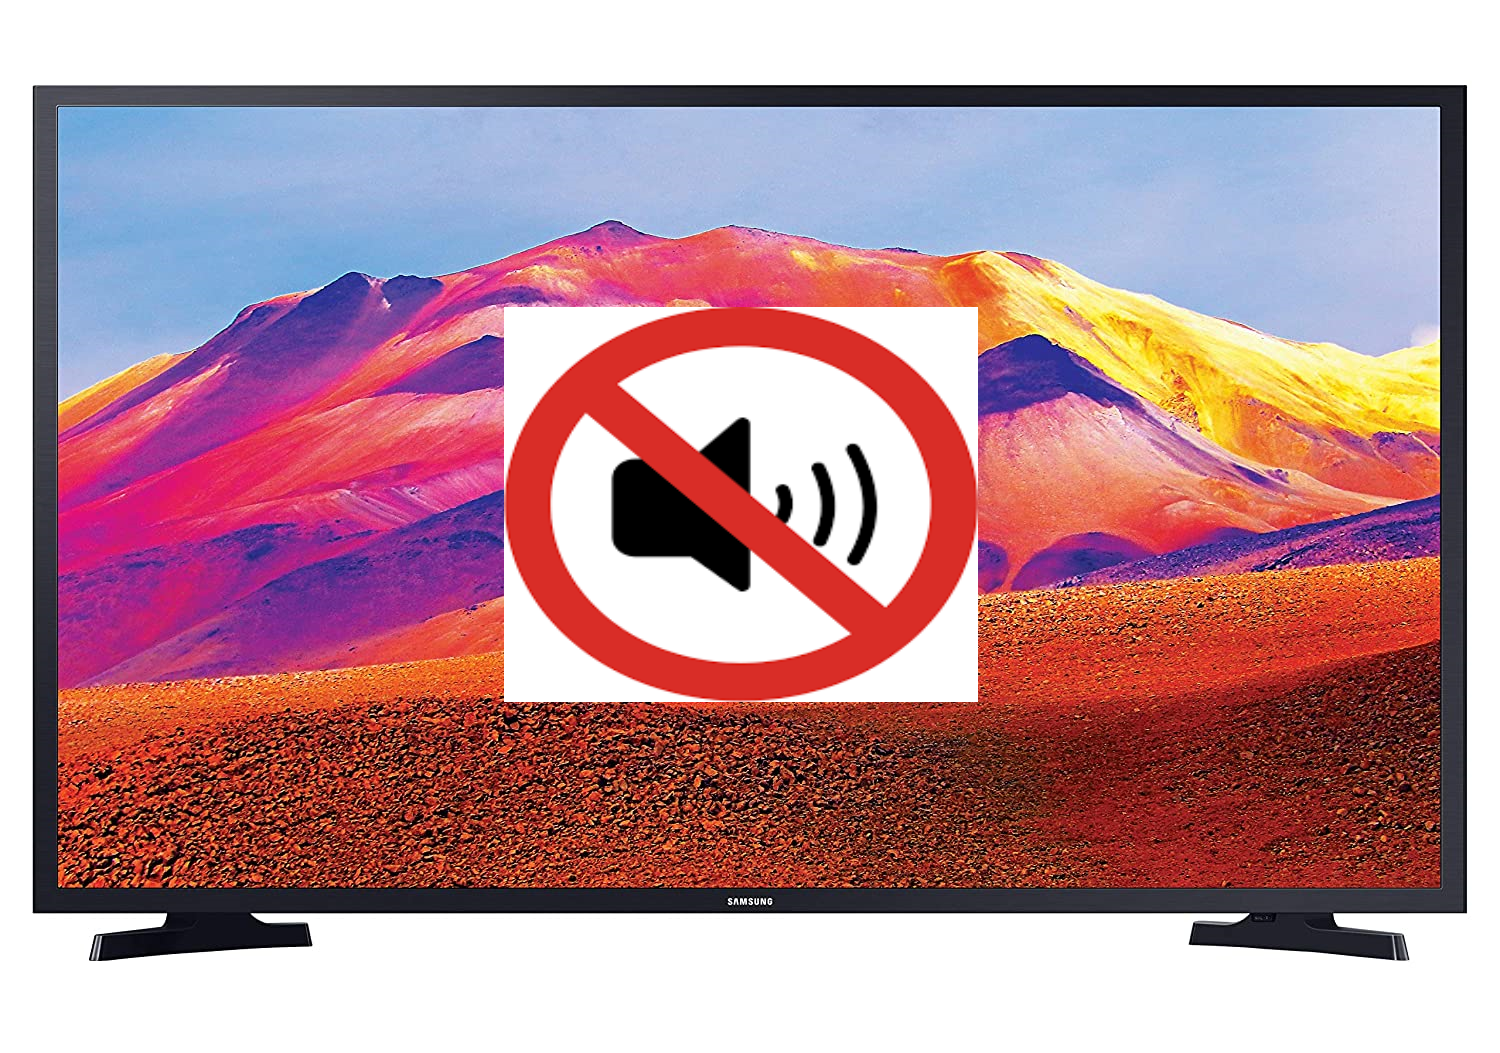 Samsung TV No Sound (Just Do This ONE THING.)